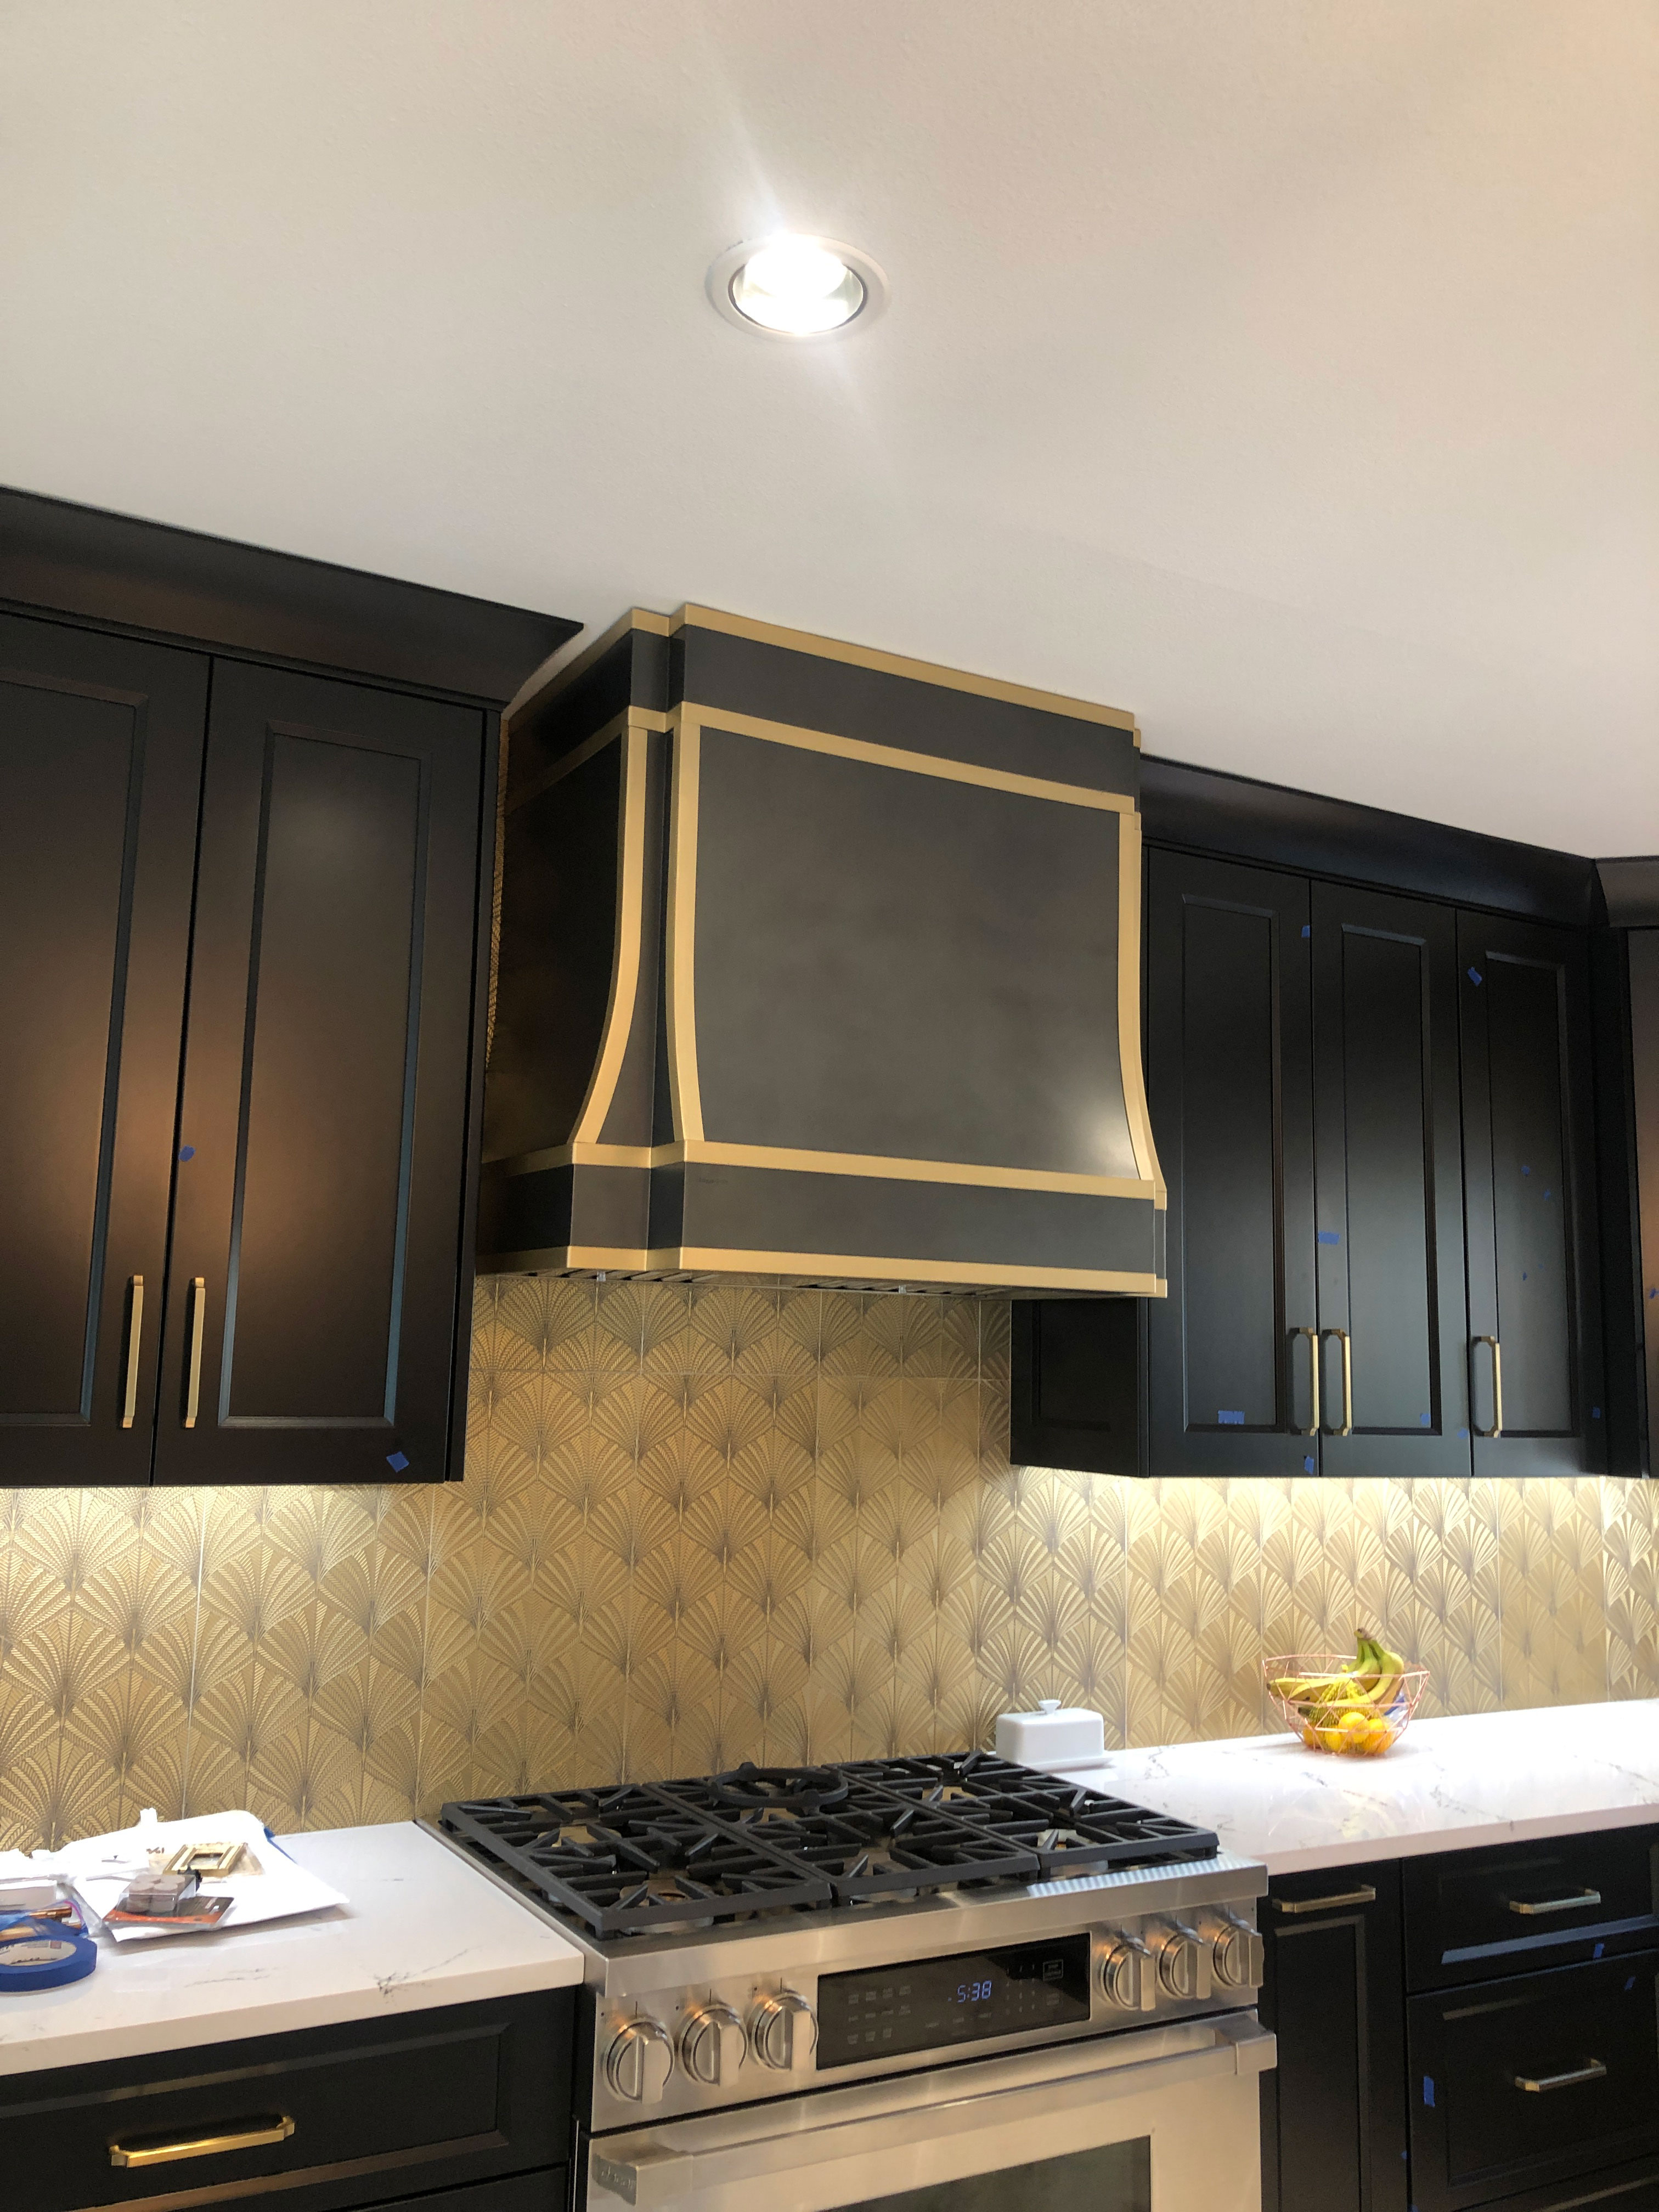 Black range hood with copper details in large kitchen World CopperSmith